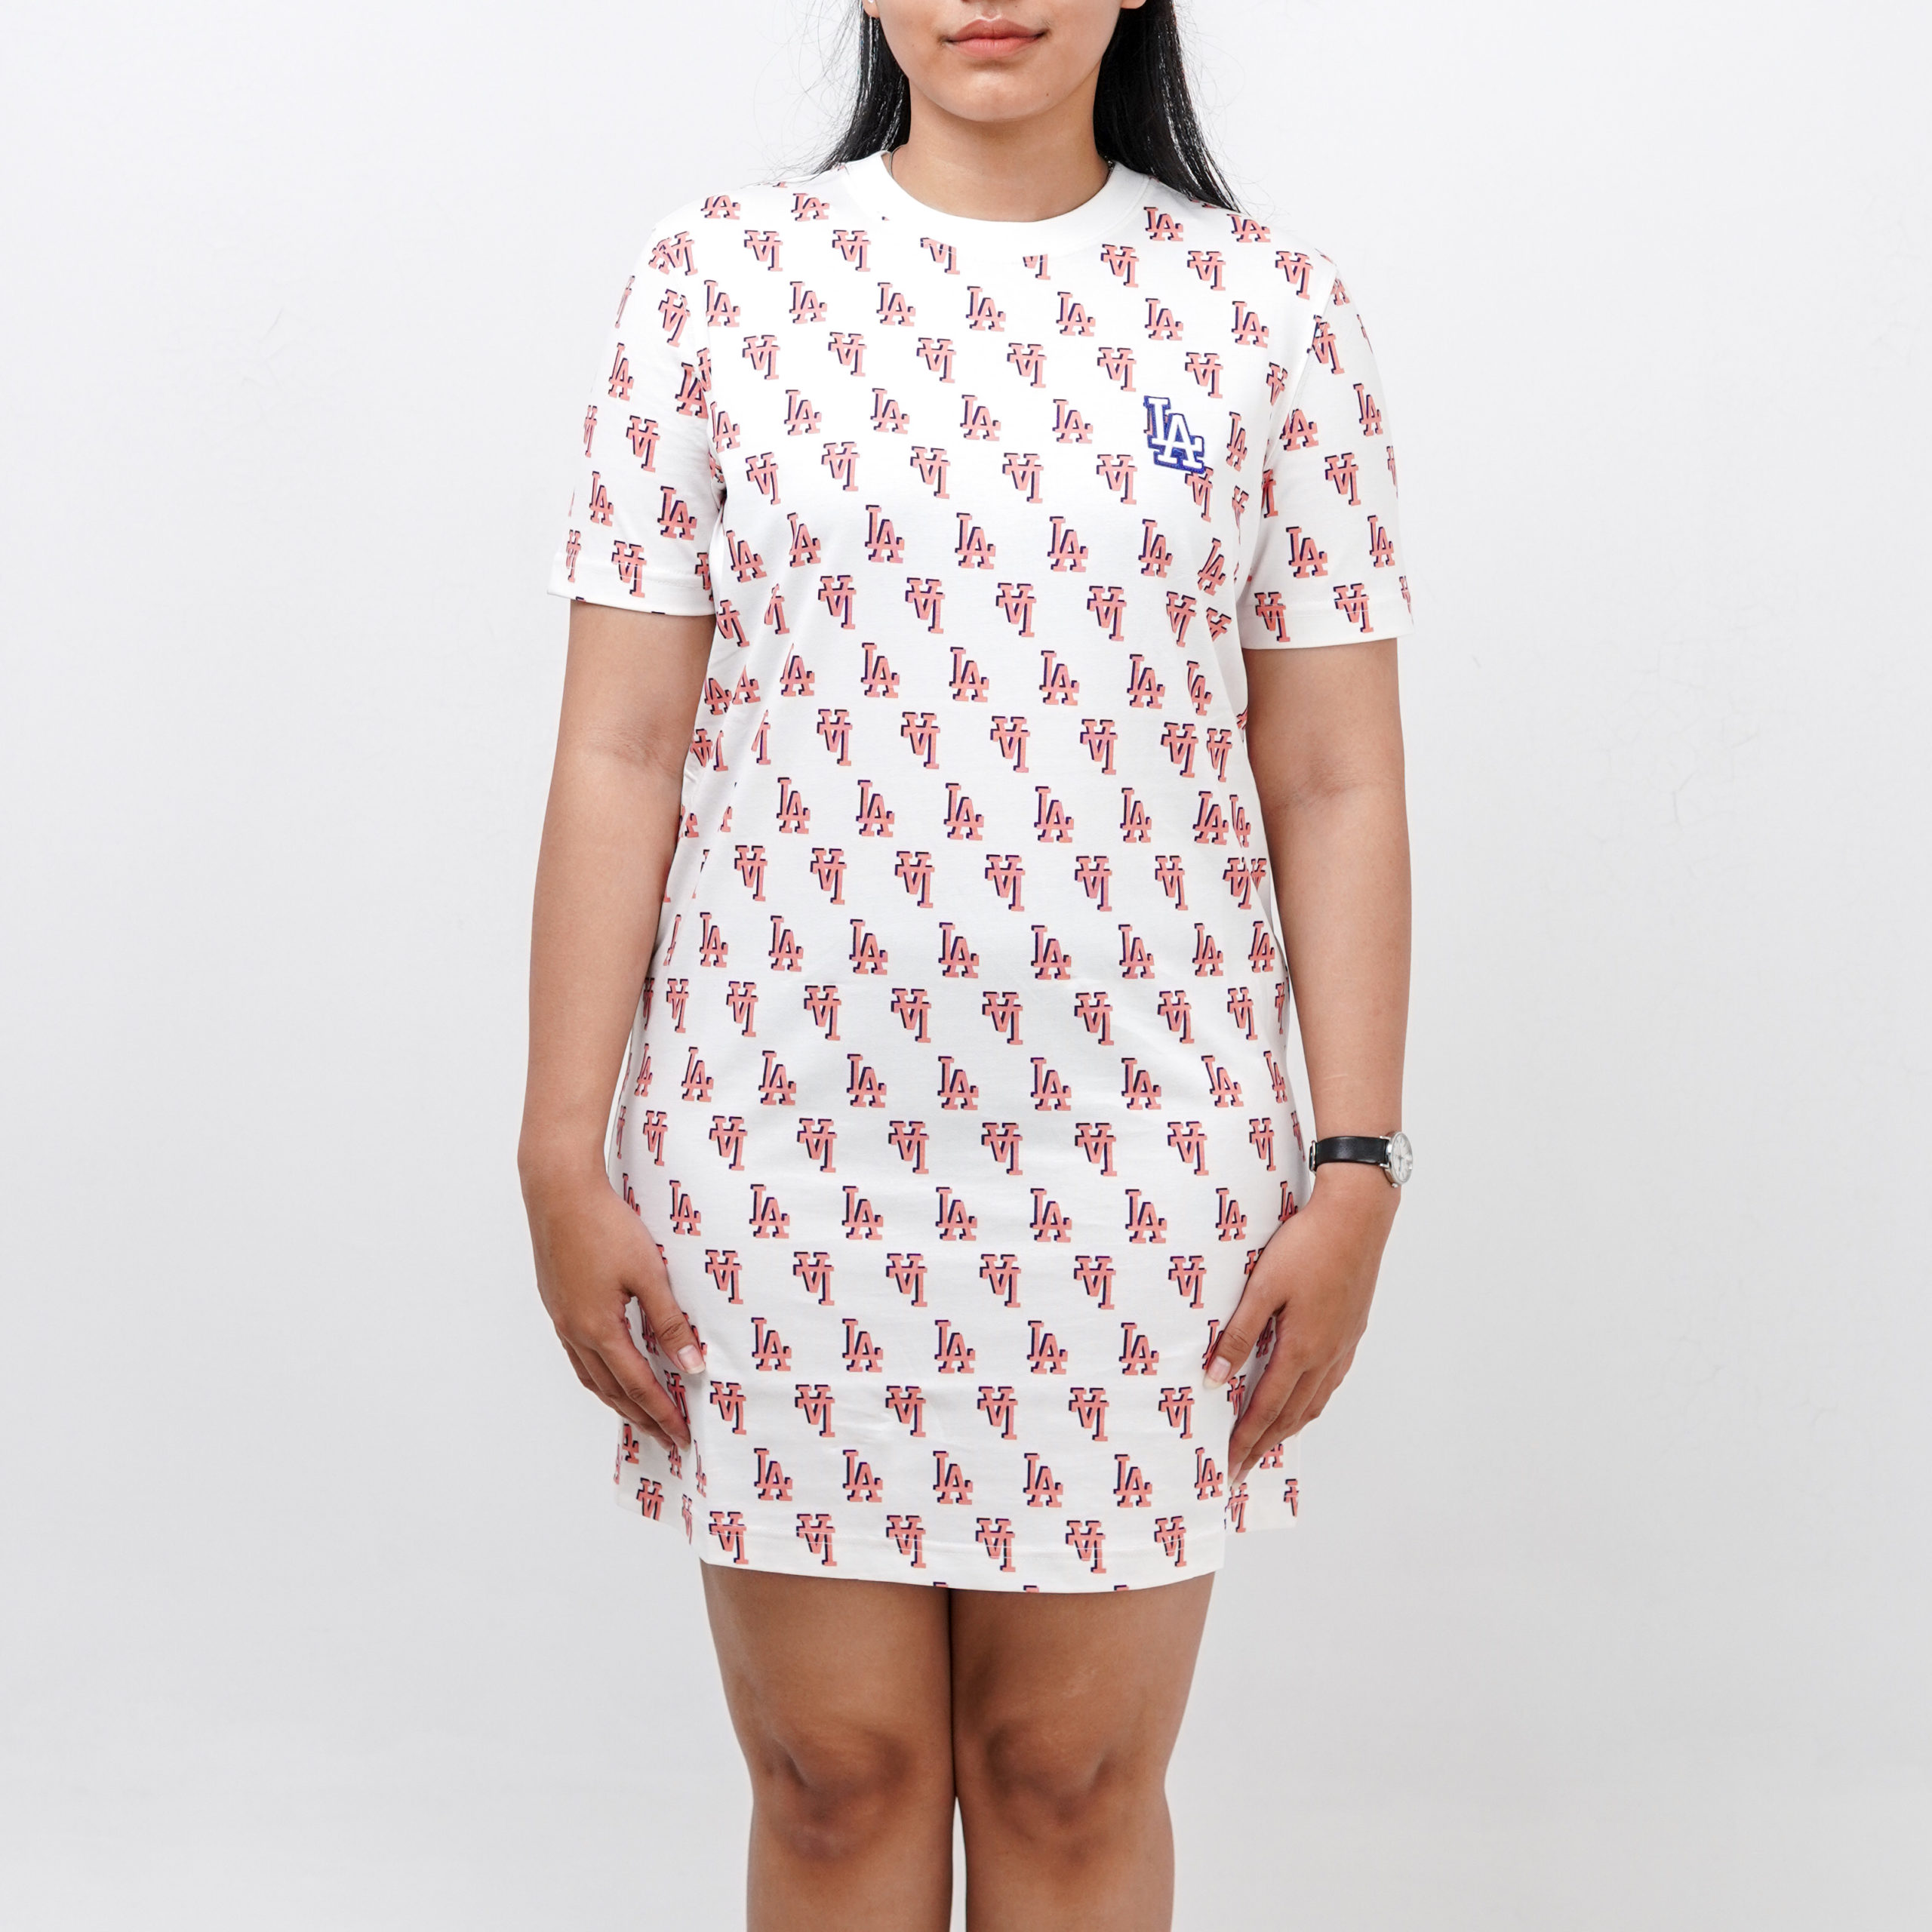 Cun boutique  MLB POLO DRESS Made in VN full tag code  Facebook